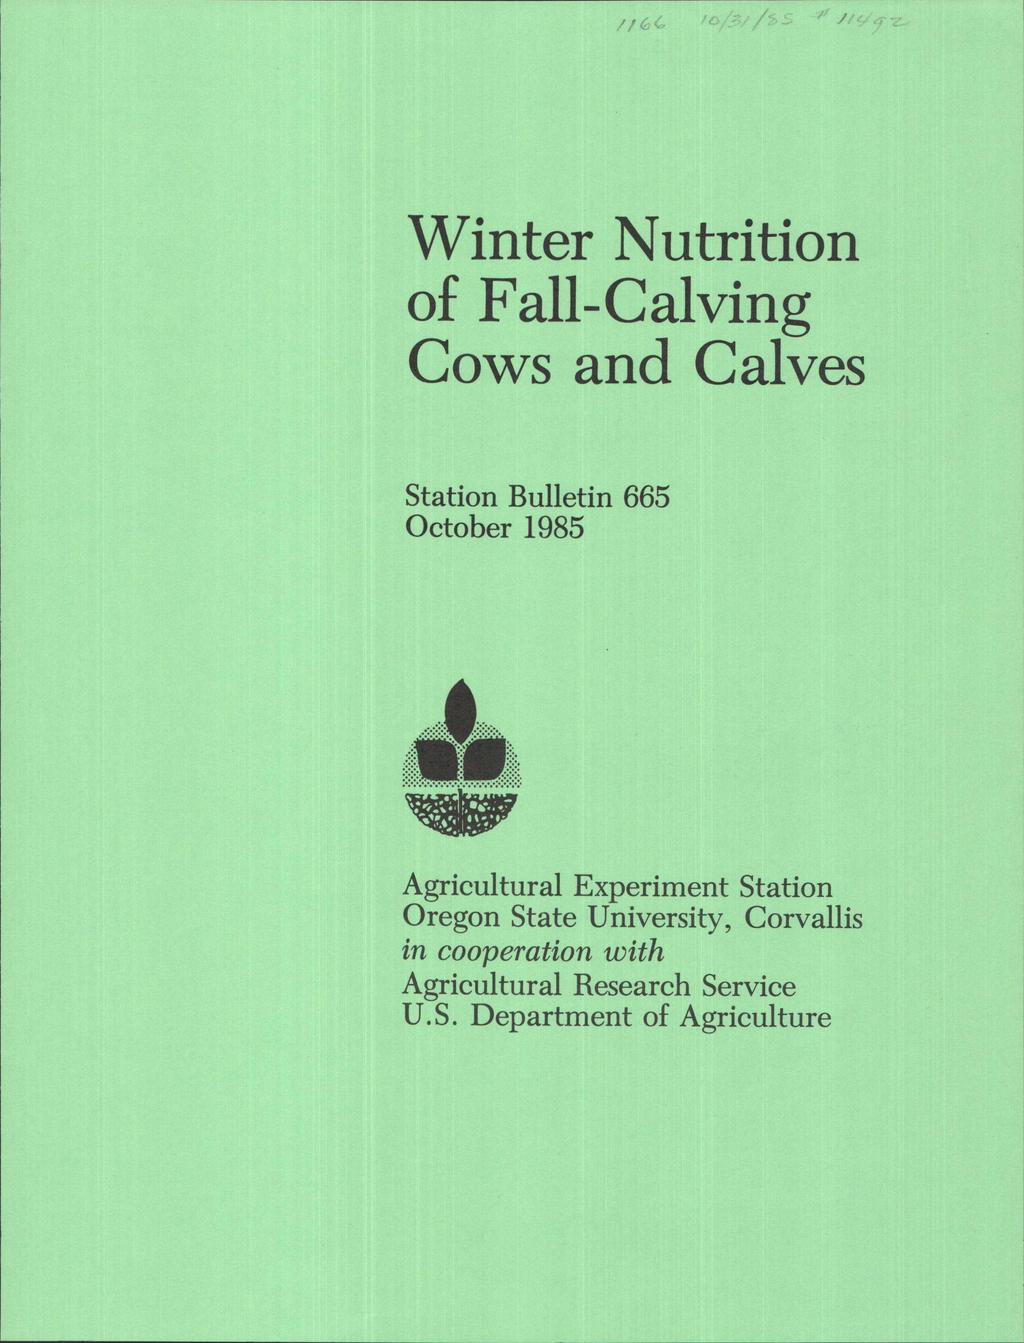 i /s s " J/iq z- Winter Nutrition of Fall-Calving Cows and Calves Station Bulletin 665 October 1985 Agricultural Experiment